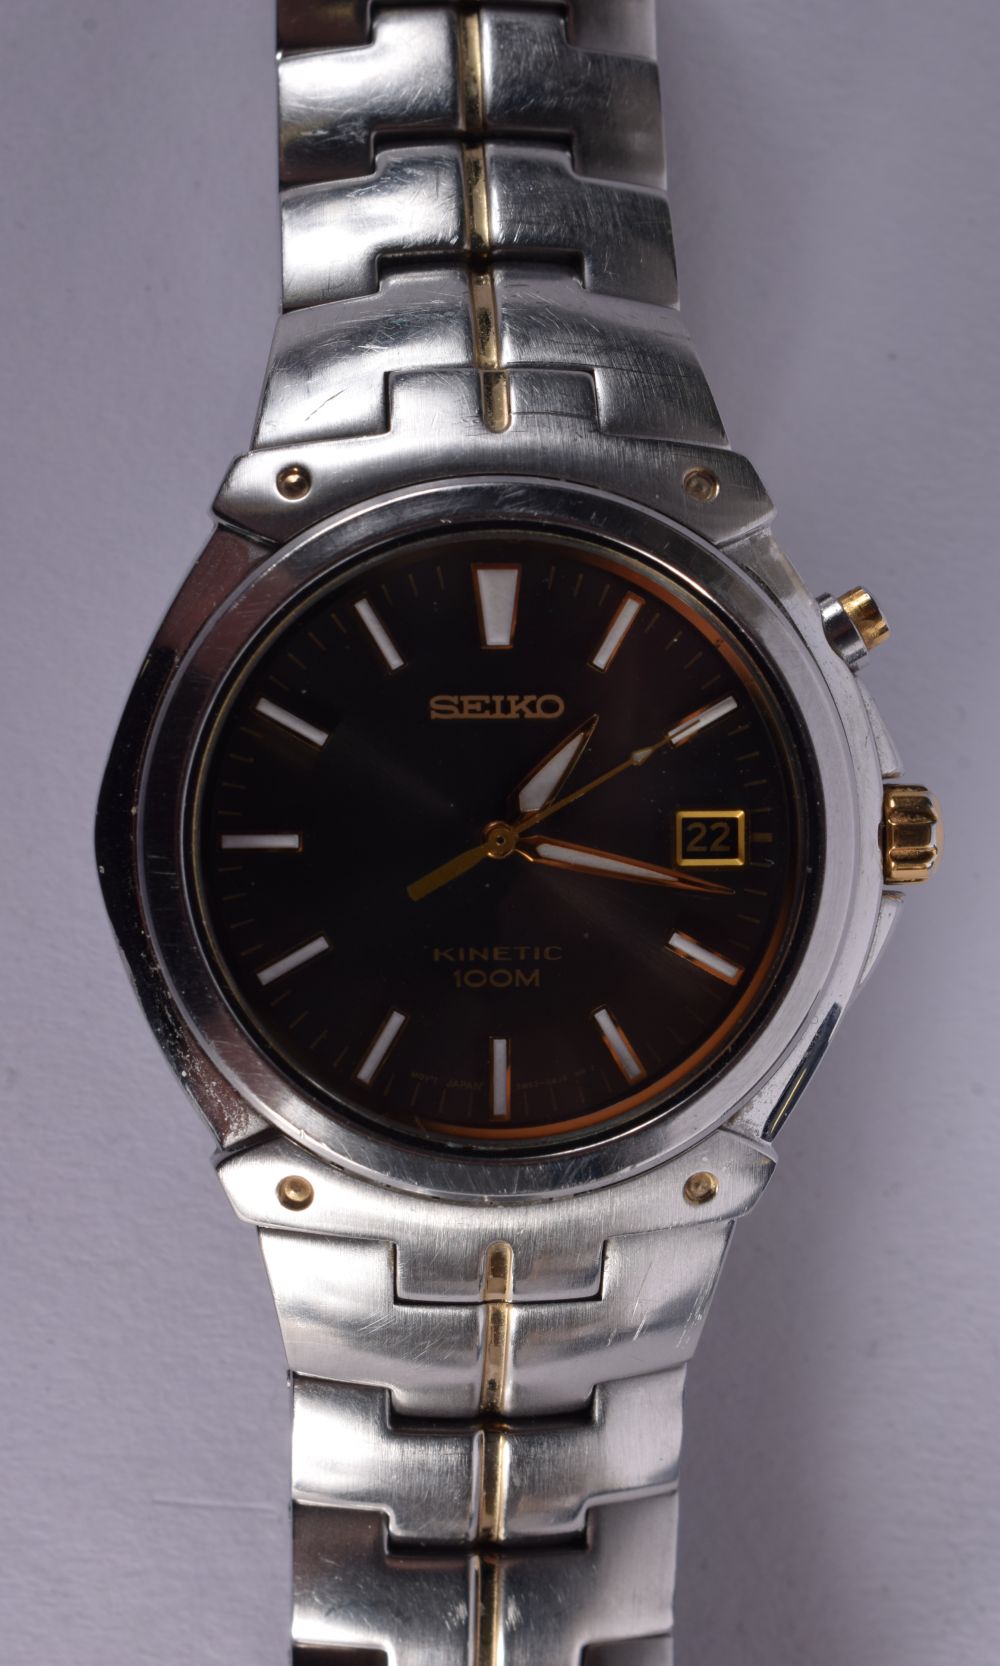 A BOXED MENS SEIKO KINETIC WATCH 5M62. Dial 4cm incl crown, with spare links.